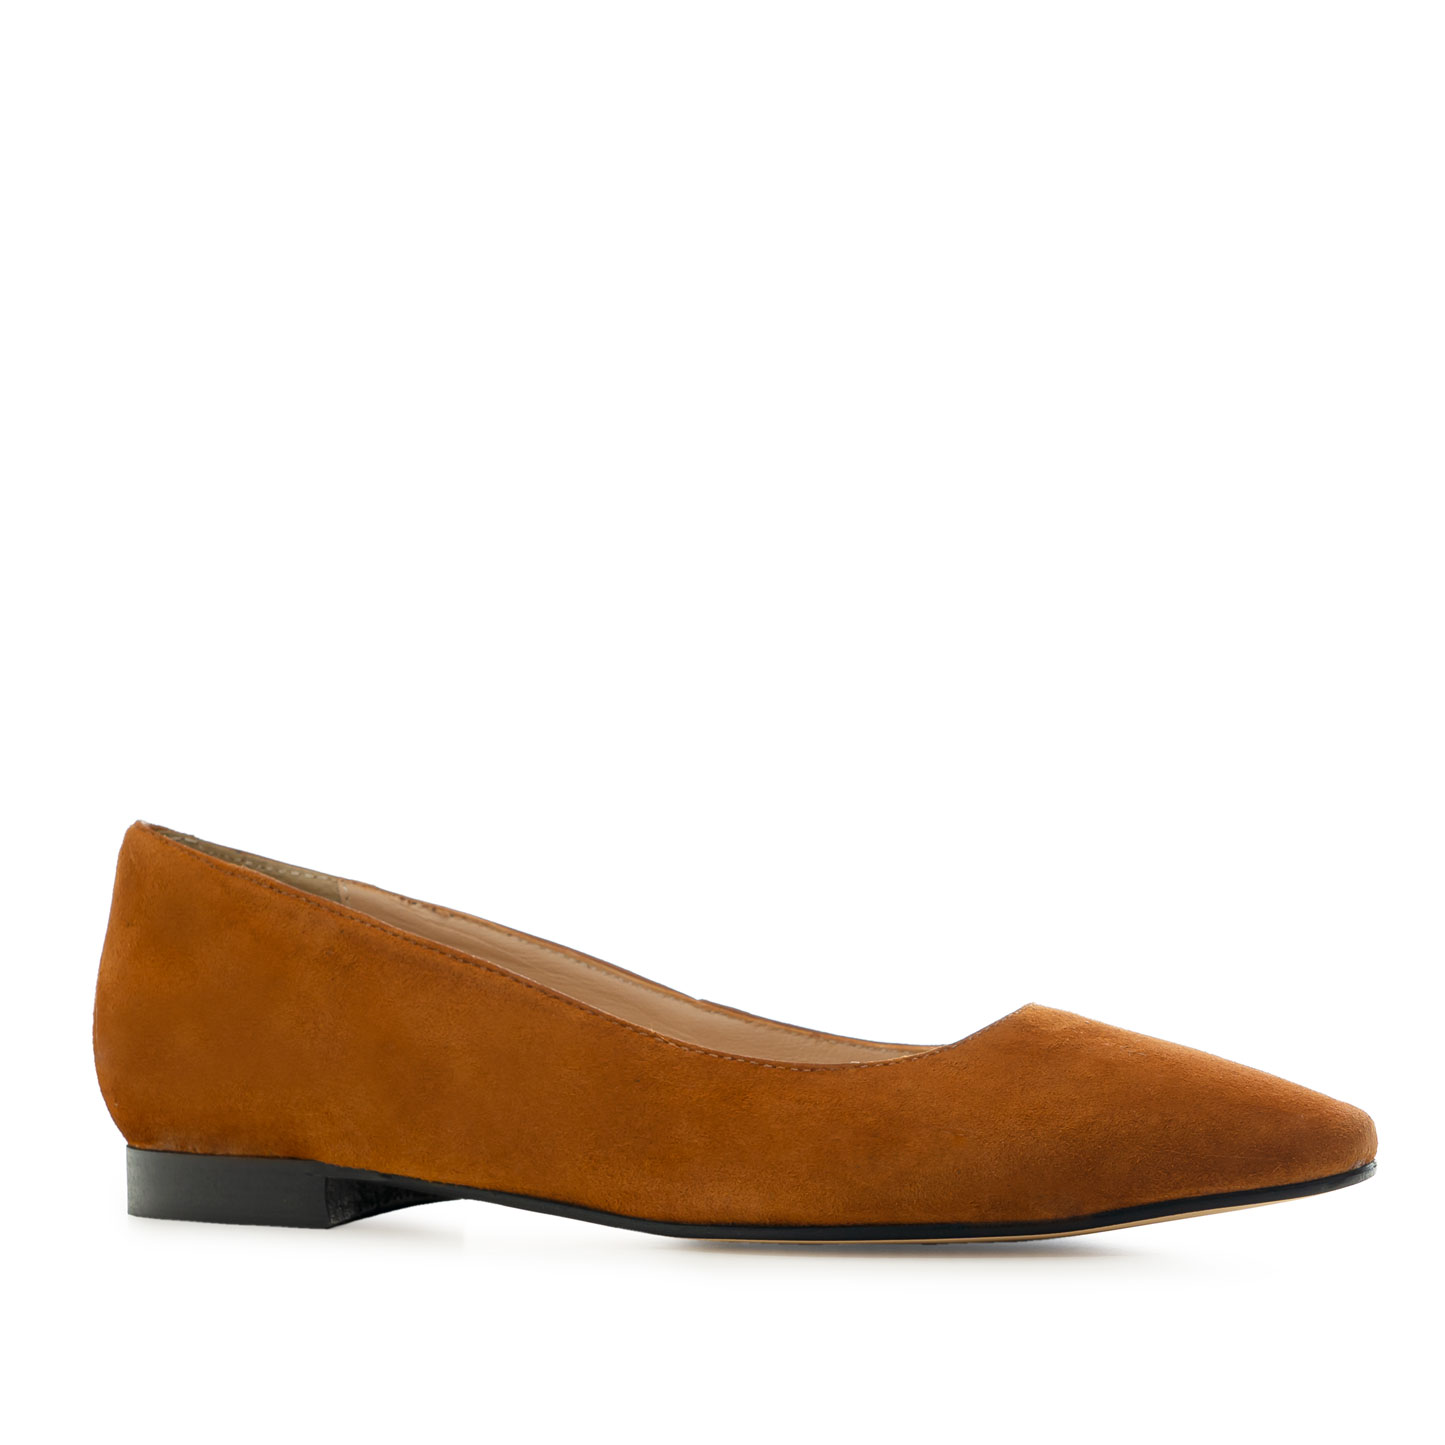 Ballet Flats in Tan-coloured Suede Leather 